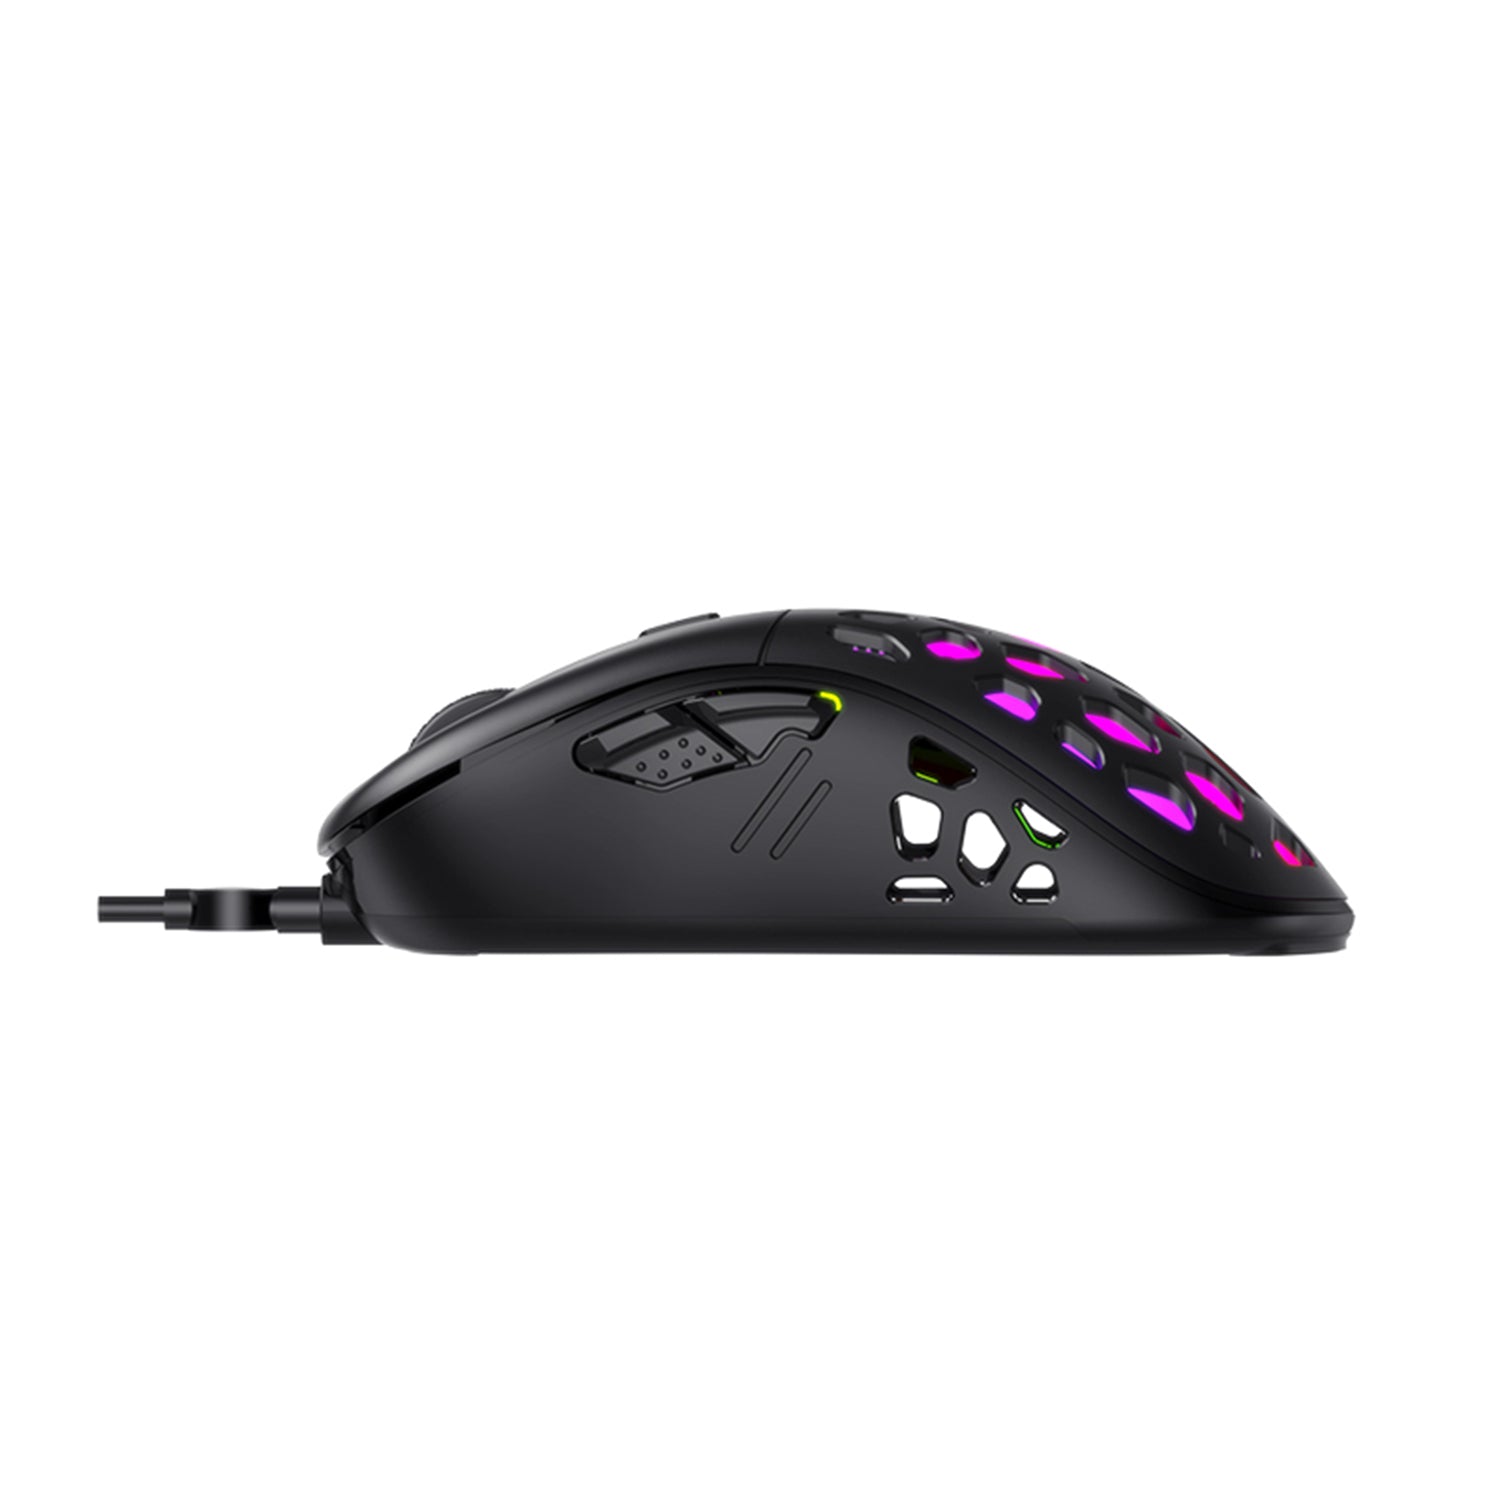 HAVIT MS955 RGB Progammable Gaming Mouse, Lightweight Honeycomb Shell, 12000 DPI, Adjustable Weights